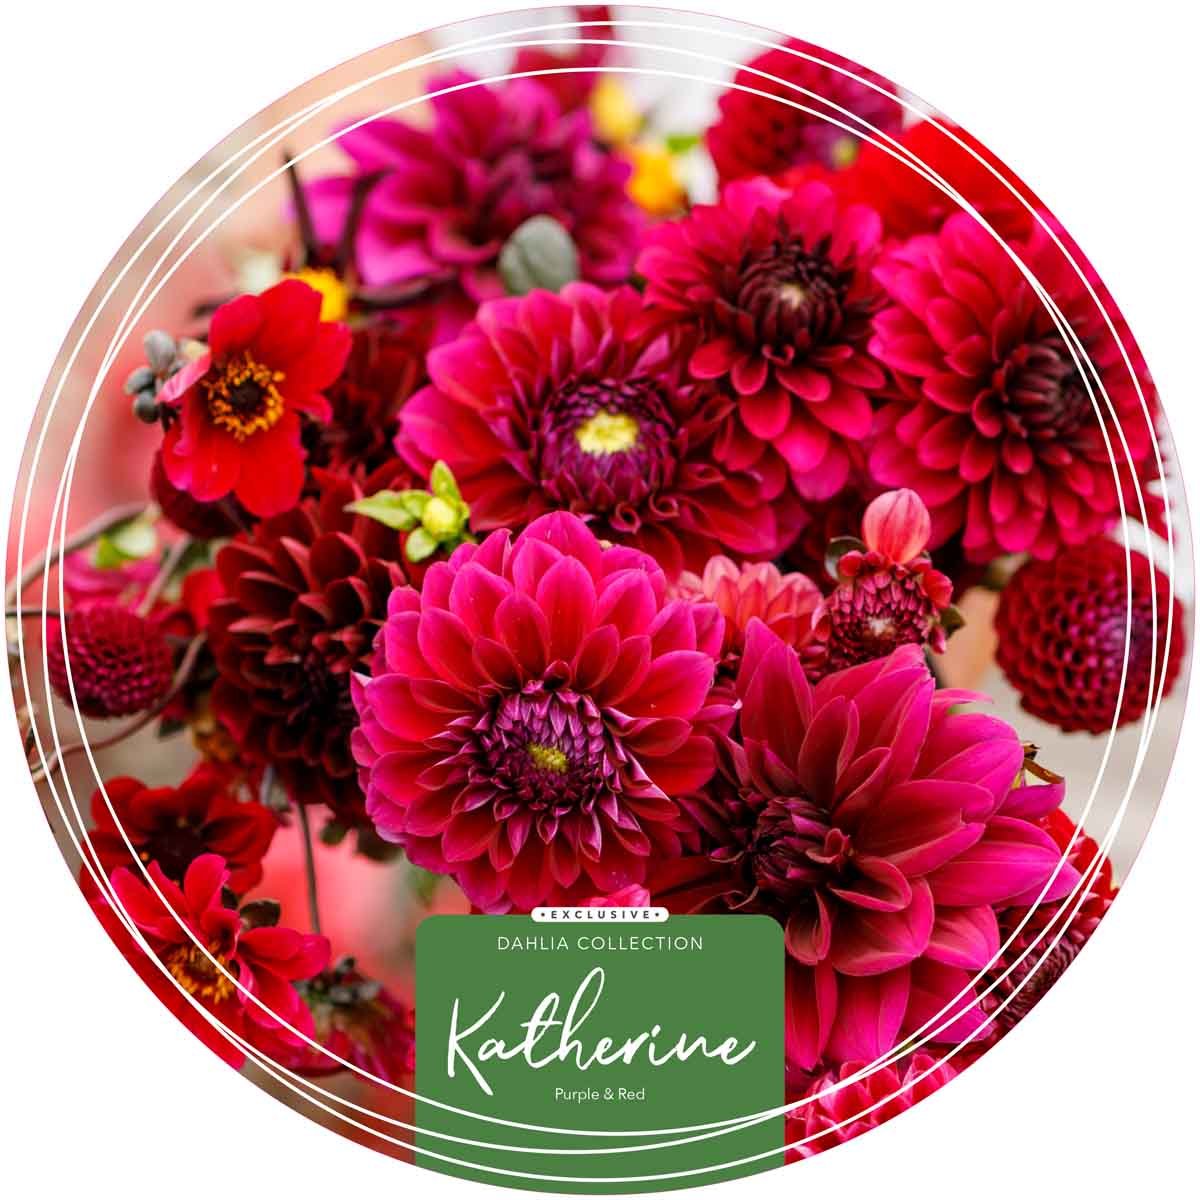 Exclusive Collection Dahlias 'Katherine' - Purple and Red